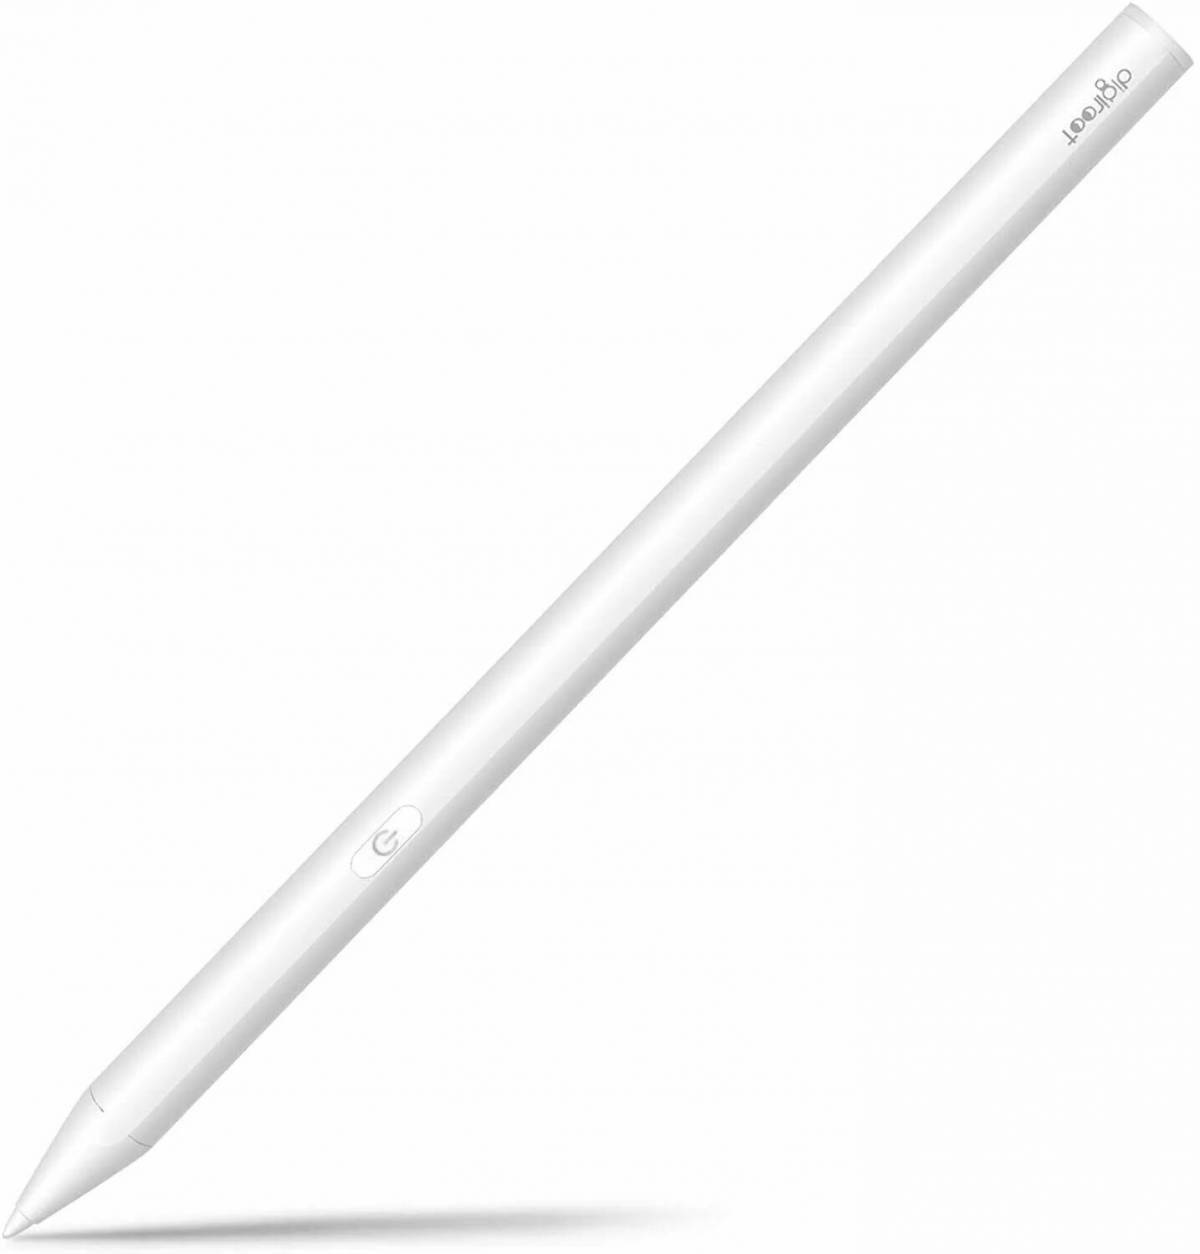 Colorful-dazzling stylus for coloring pages